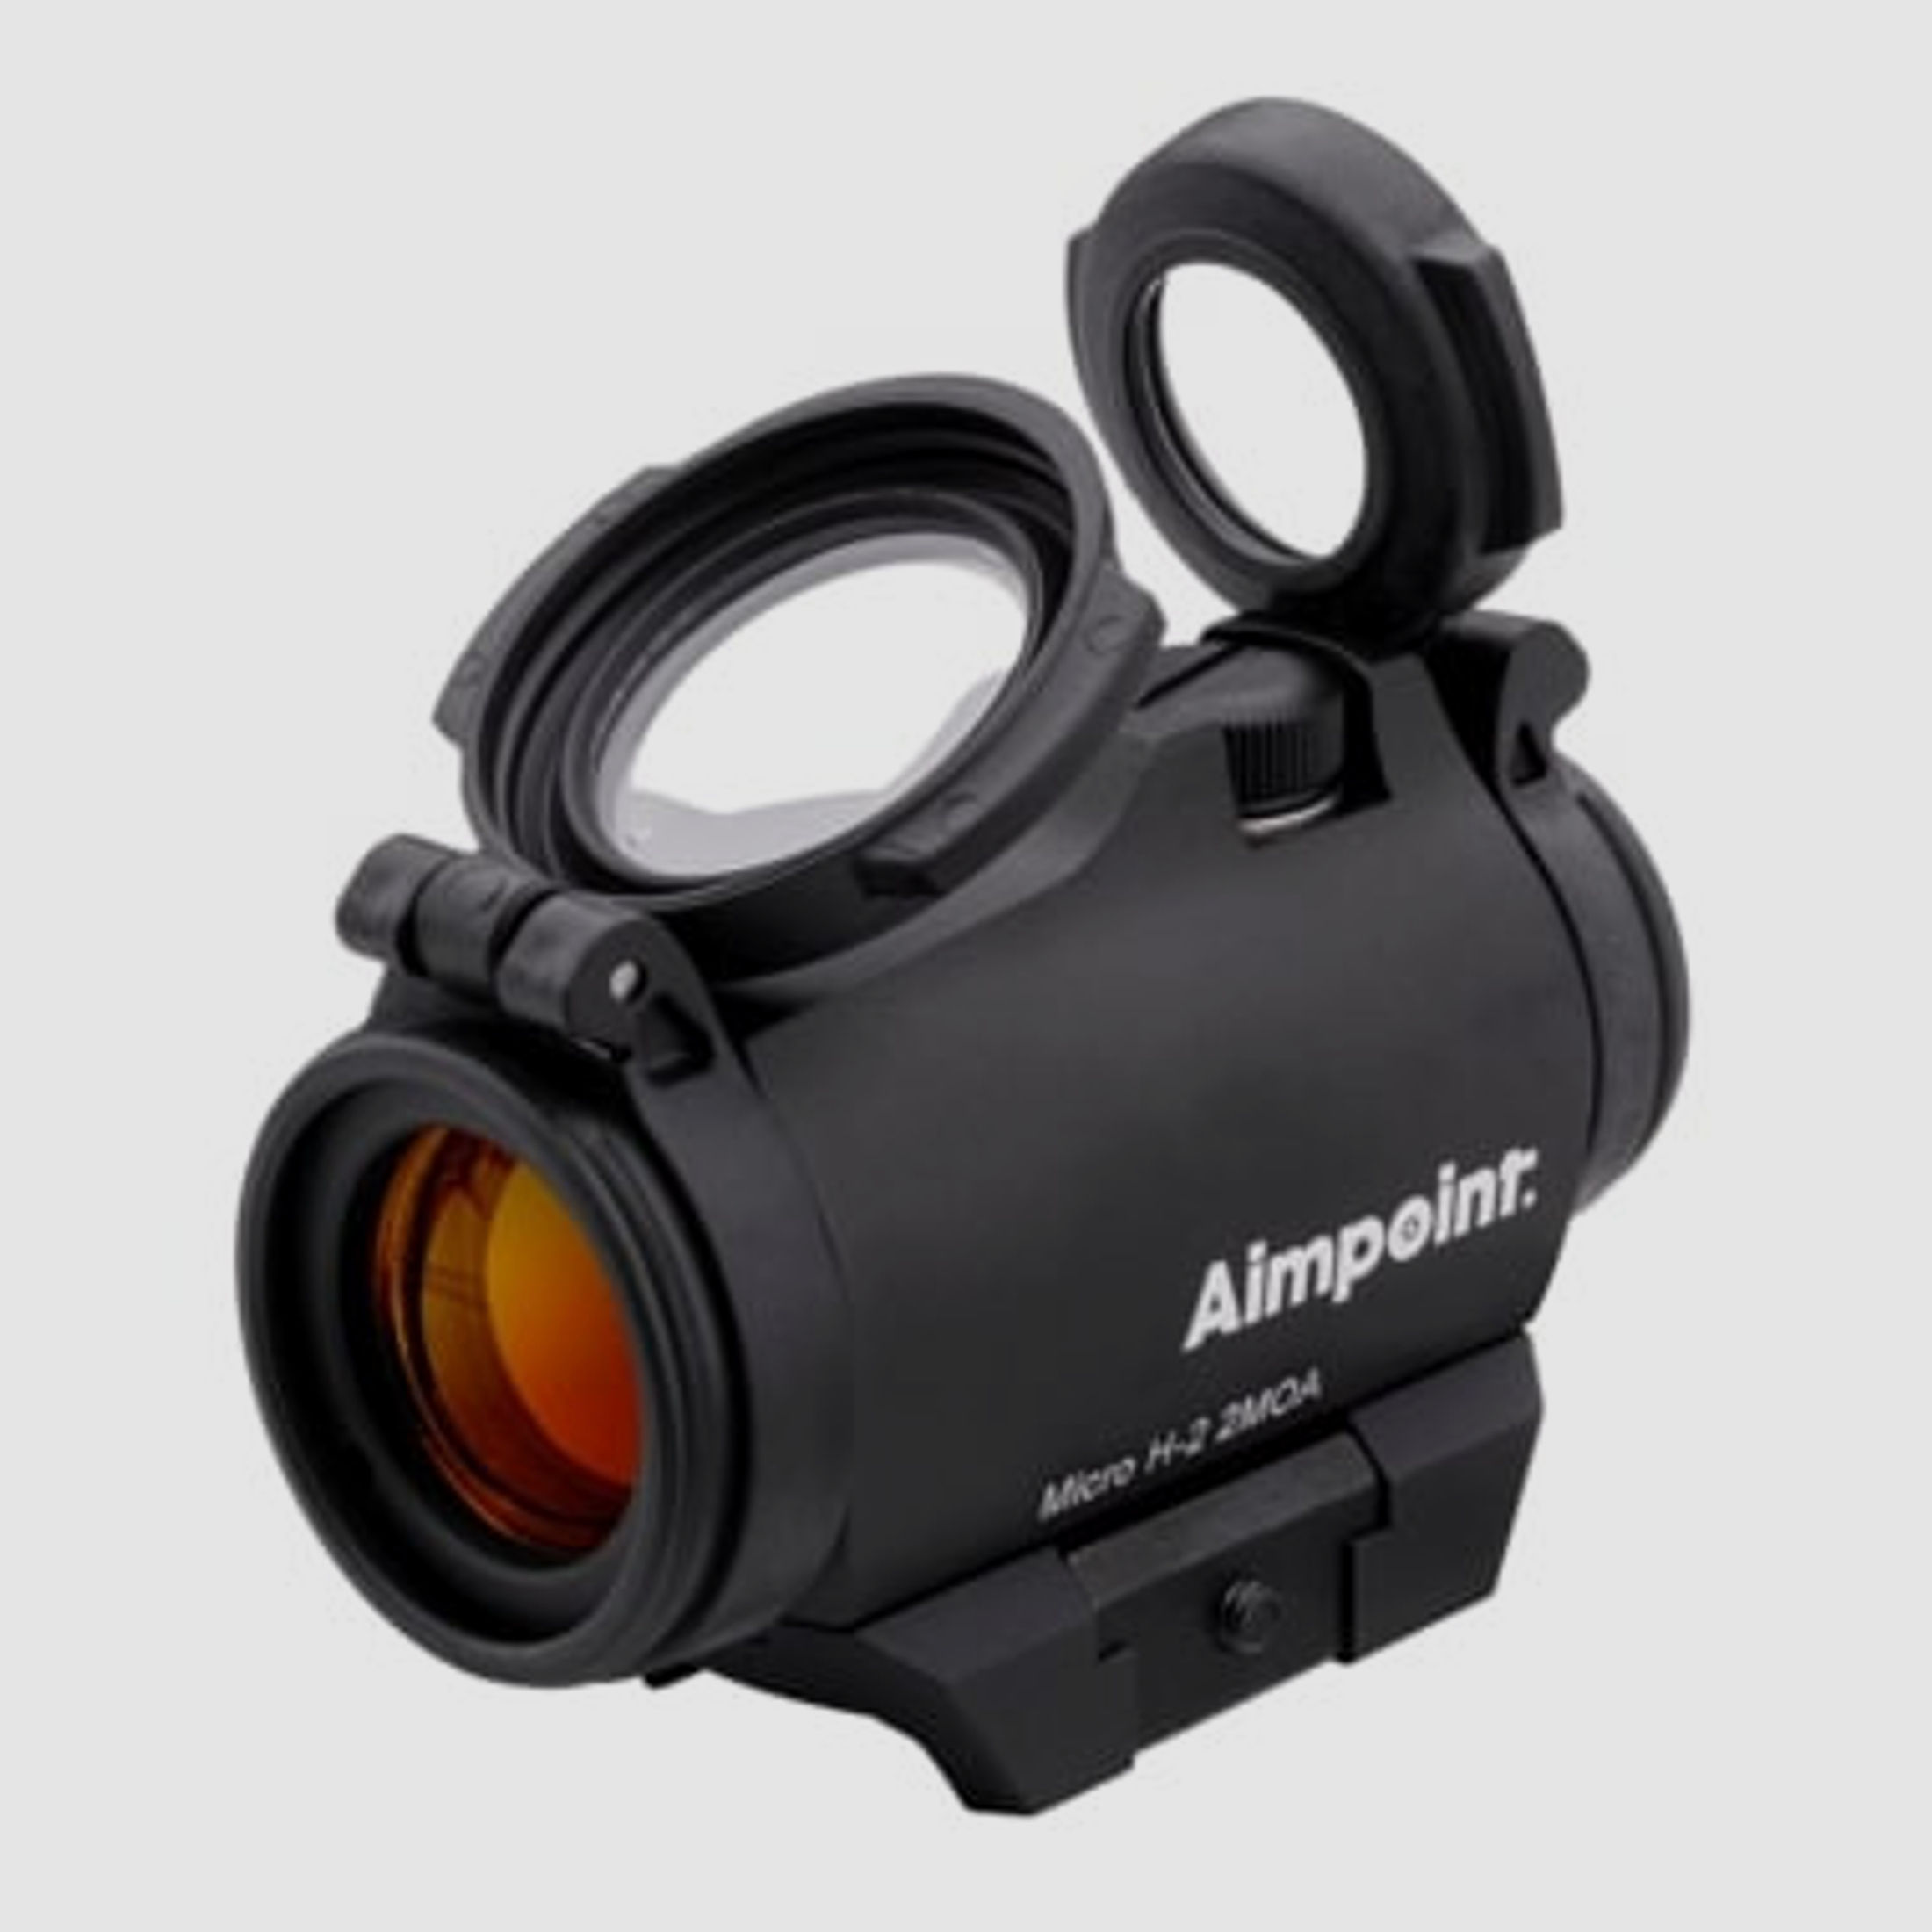 Aimpoint Micro H-2 2 MOA / Schwarz / incl. Pic-A Rotpunkt